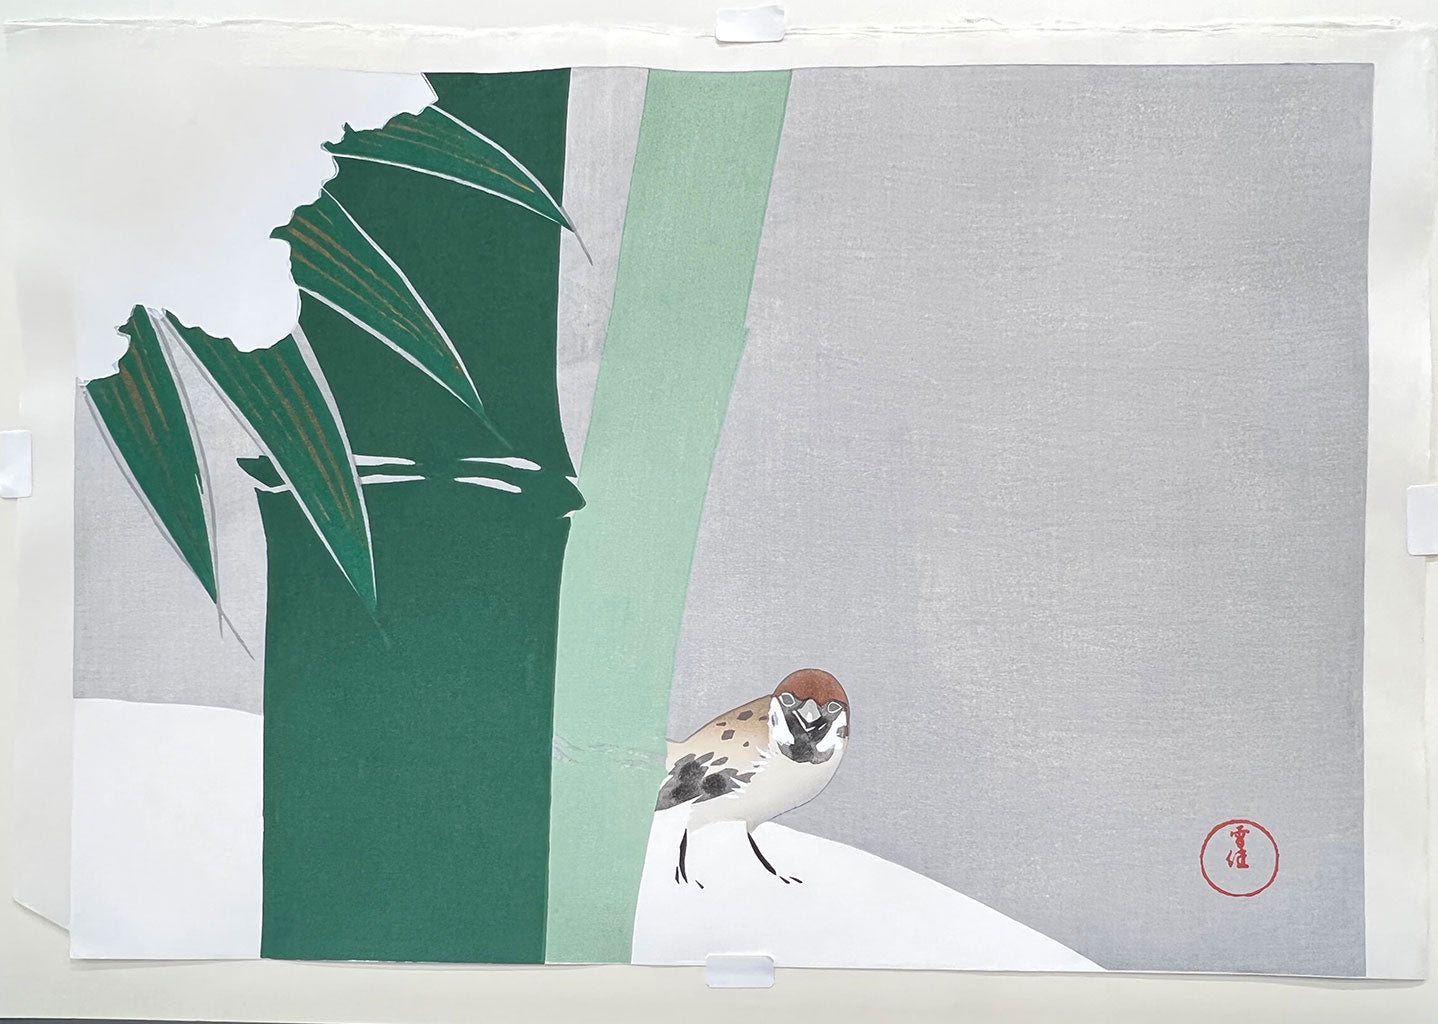 Woodblock print "Bamboo in the snow" by Kamisaka Sekka Published by UNSODO